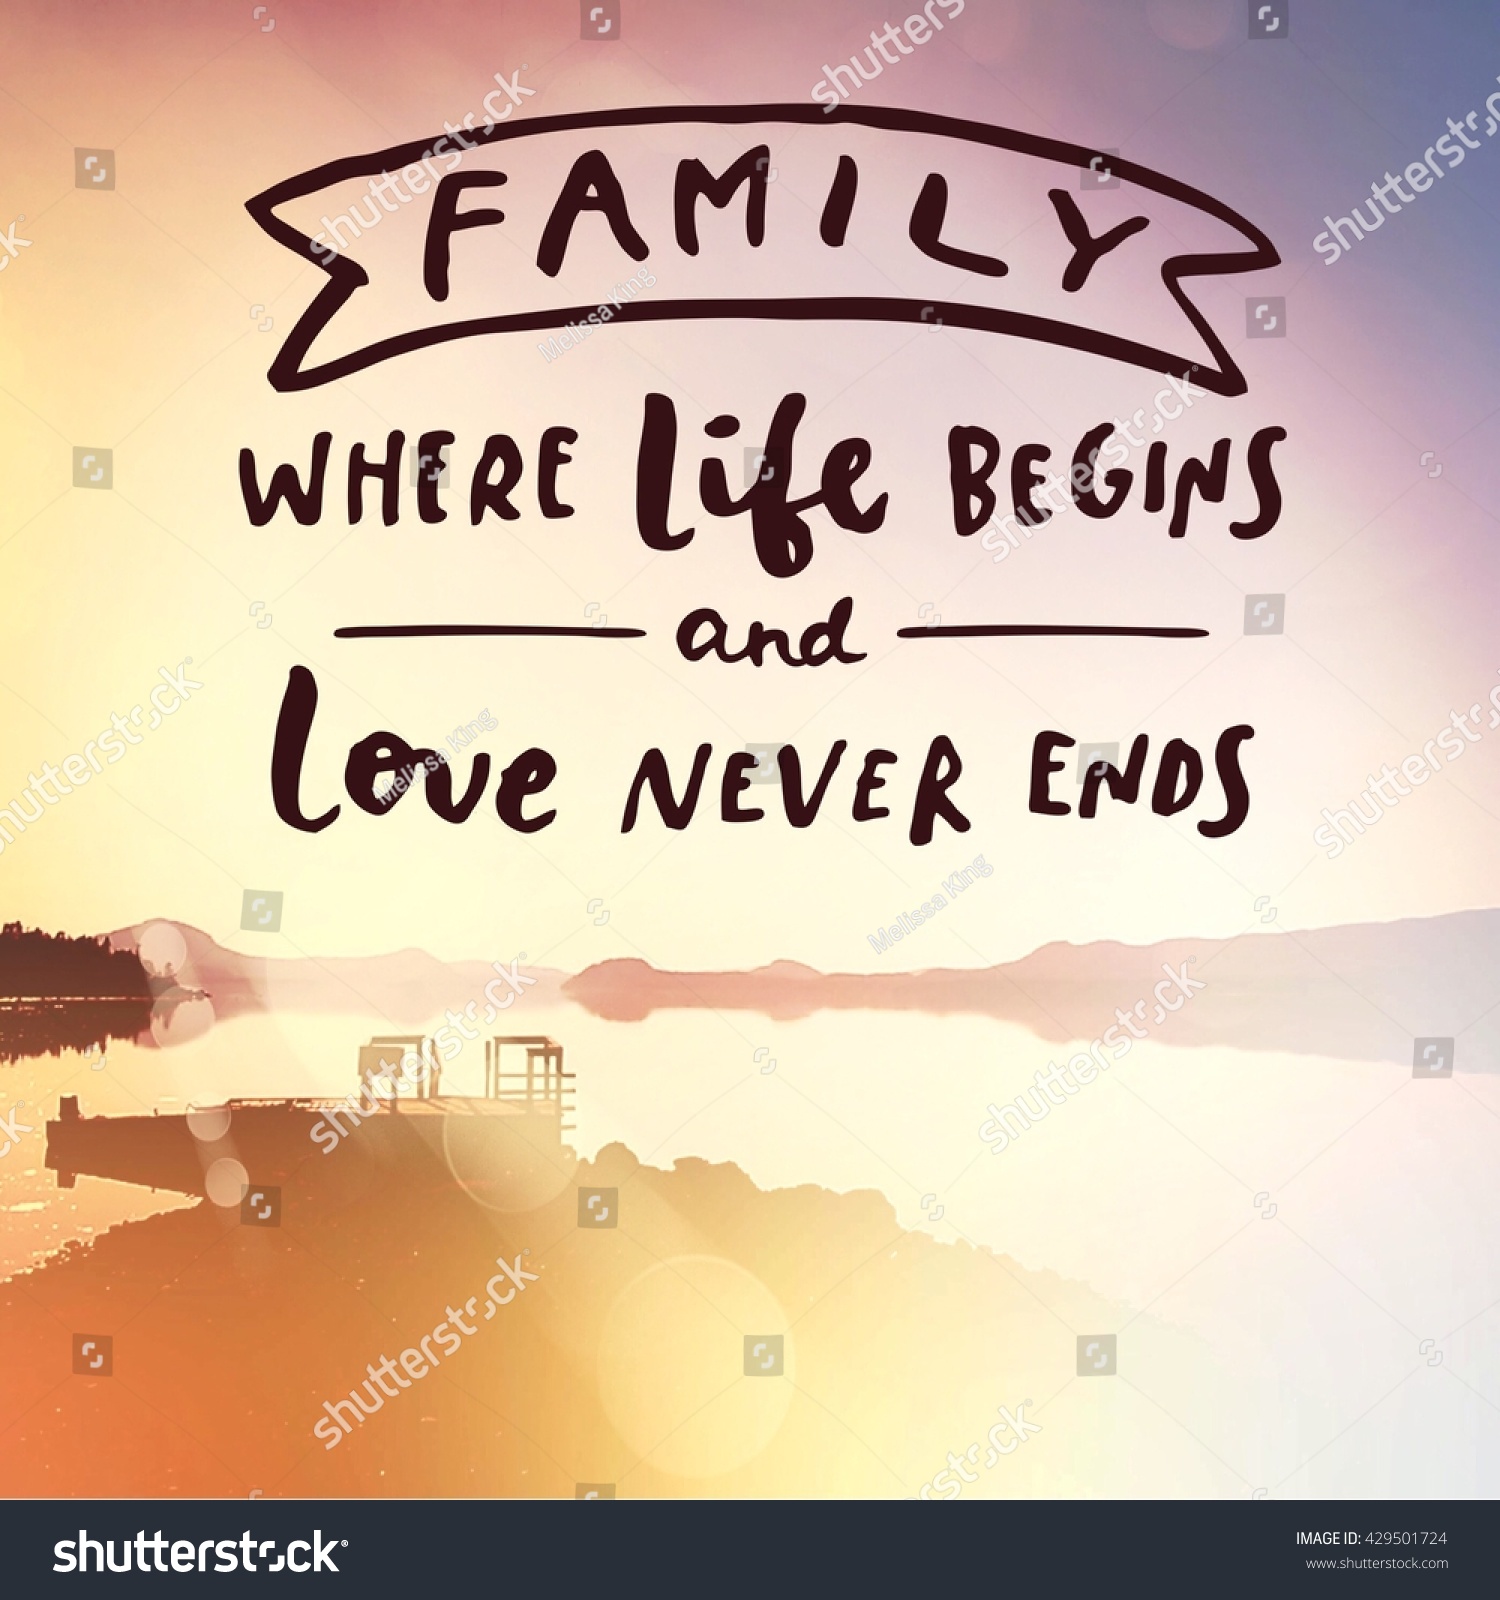 Family quotes Stock Photos, Images & Photography | Shutterstock